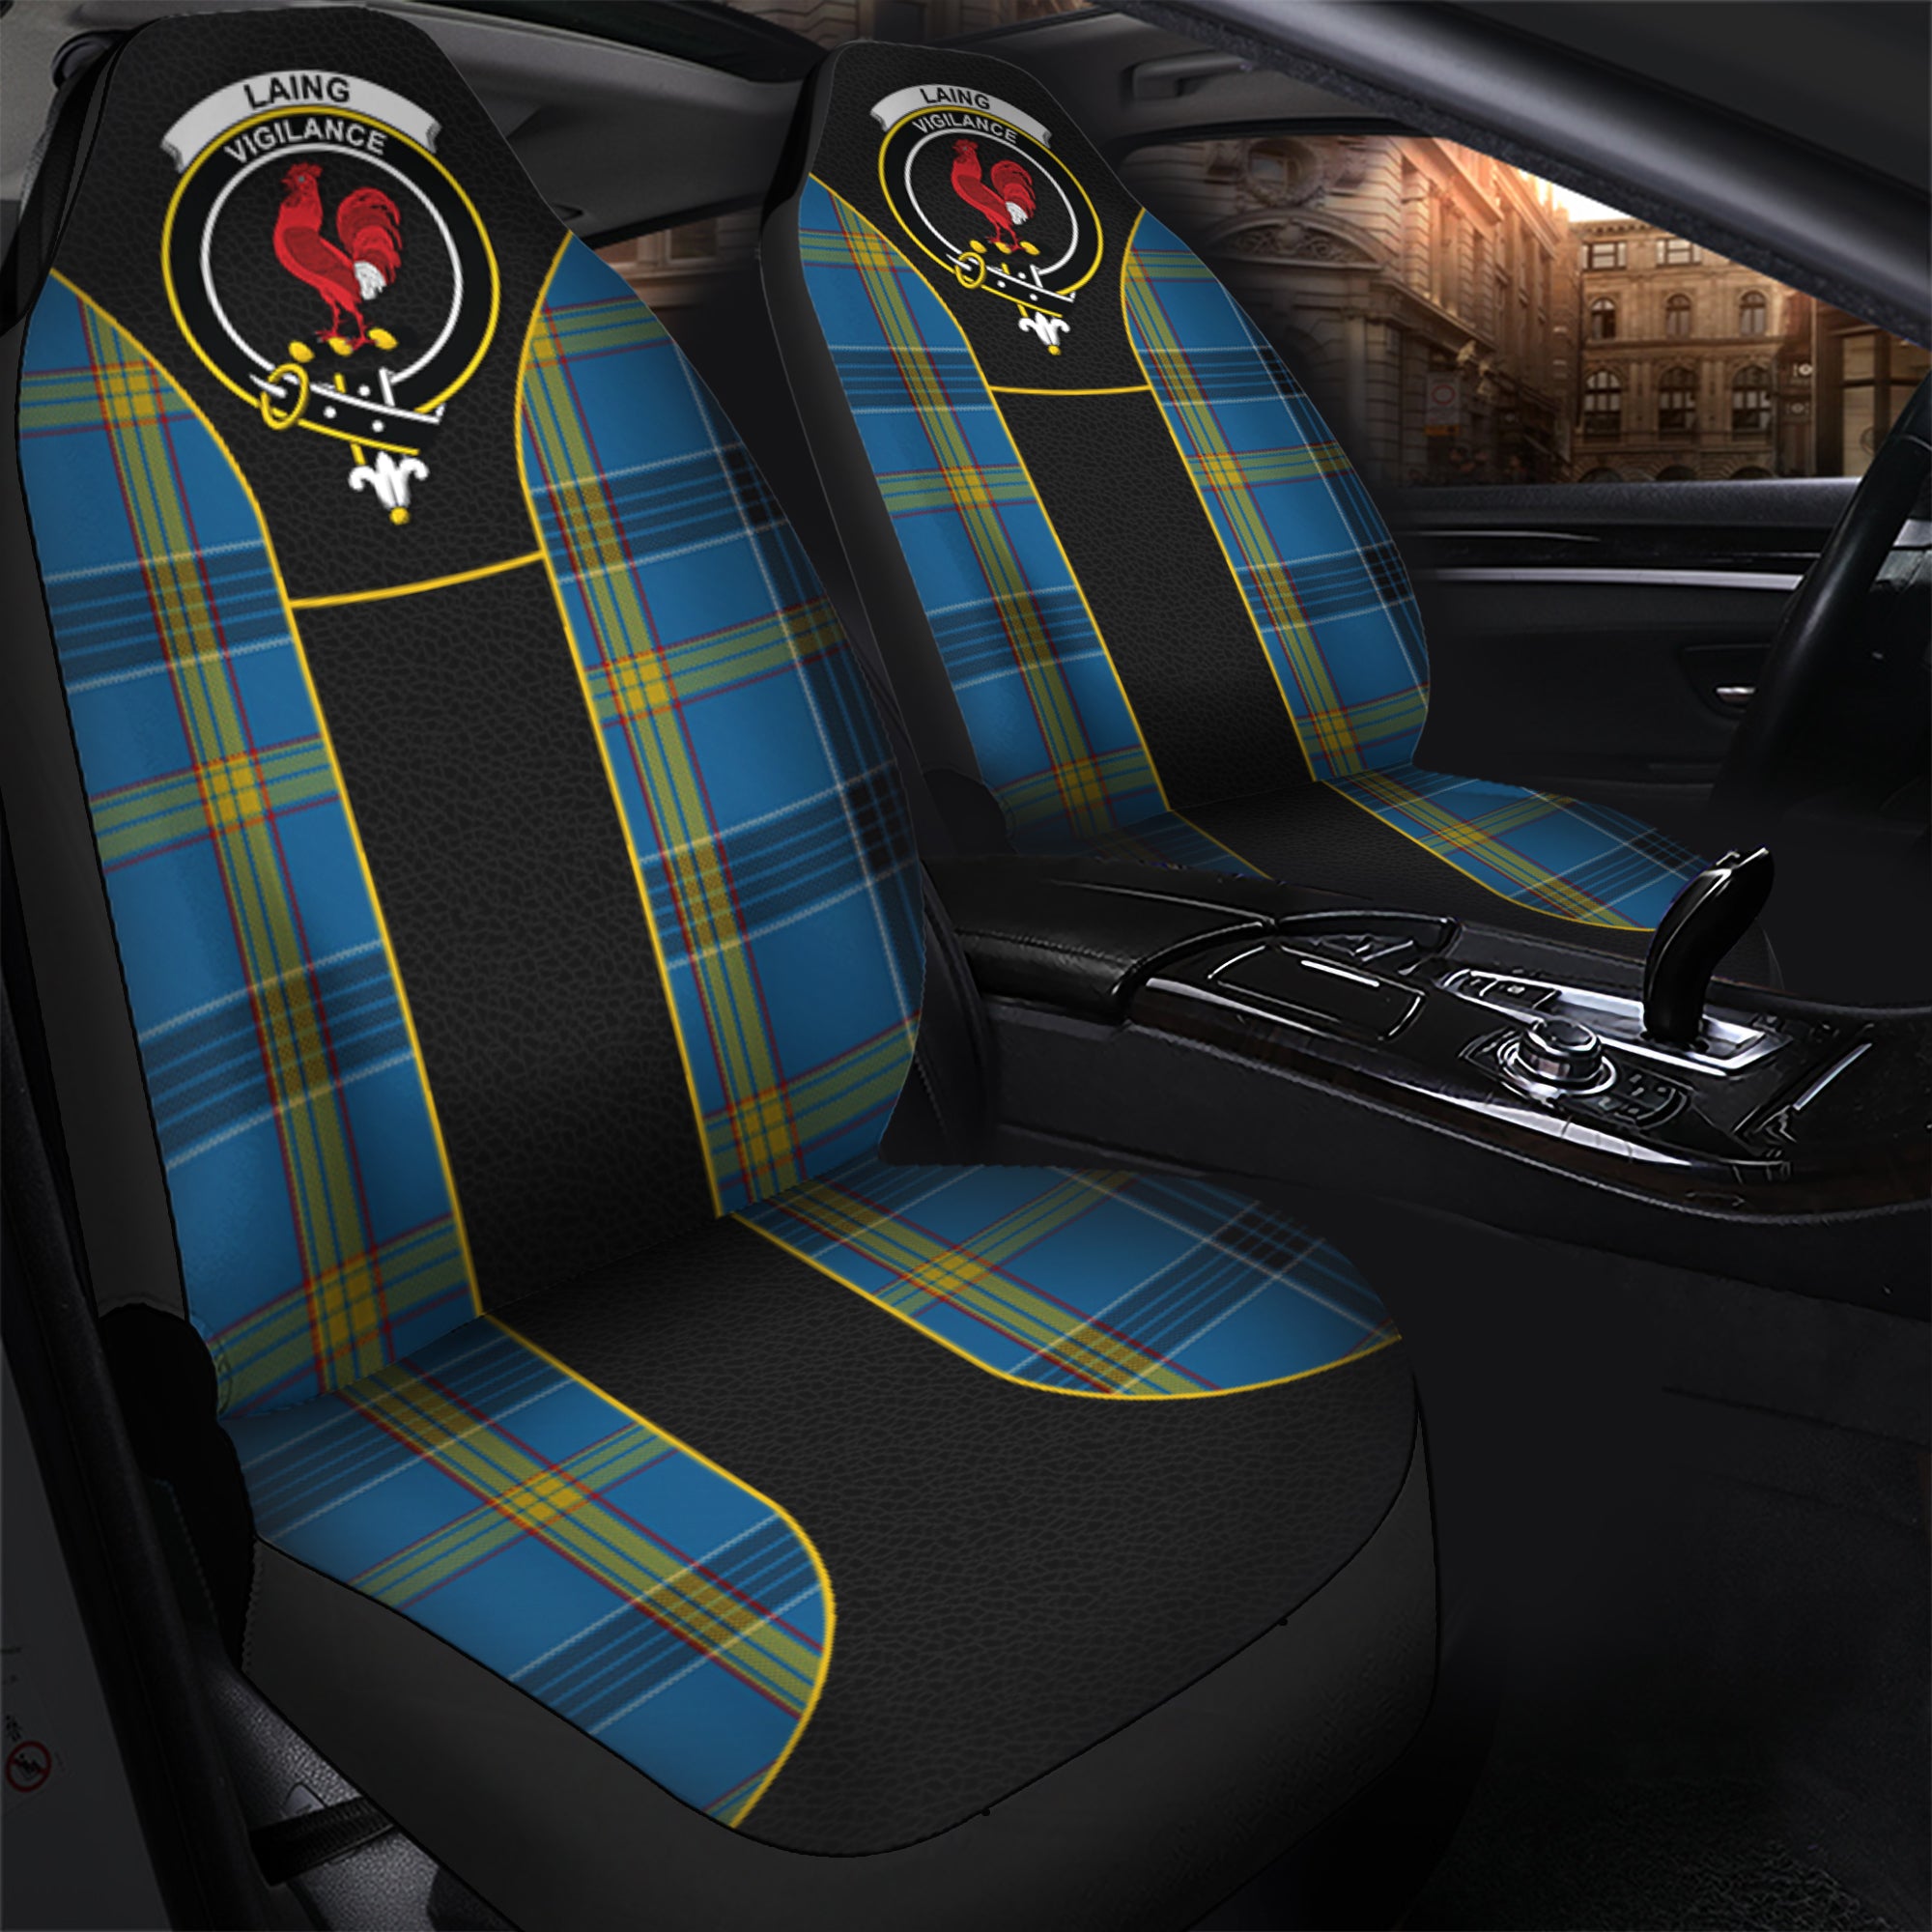 scottish-laing-tartan-crest-car-seat-cover-special-style